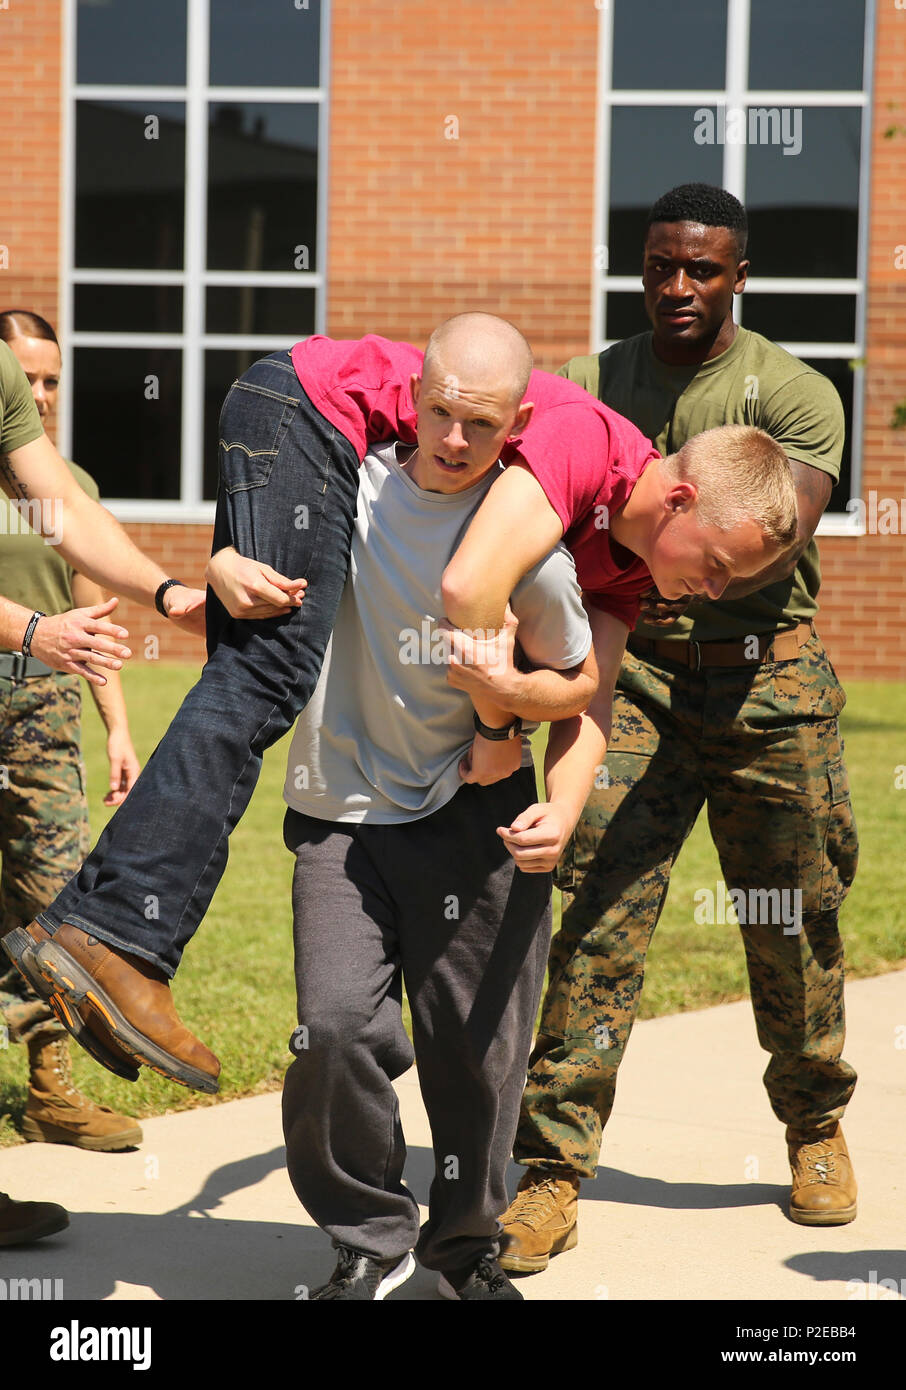 Cpl. Xavier Payne, a crash fire rescue Marine with Marine Wing Support Squadron 274, 2nd Marine Air Wing, based out of Marine Corps Air Station Cherry Point, assists high school students as they take on a mock combat fitness test at Stewart Creek High School in Smyrna, Tenn., Sept. 6, 2016. More than 800 Marines from all over the country travelled to Nashville in support of Marine Week to commemorate the unwavering support of the American people, and show the Marine Corps’ continued dedication to protecting the citizens of this country. (U.S. Marine Corps photo by Cpl. Kaitlyn V. Klein) Stock Photo